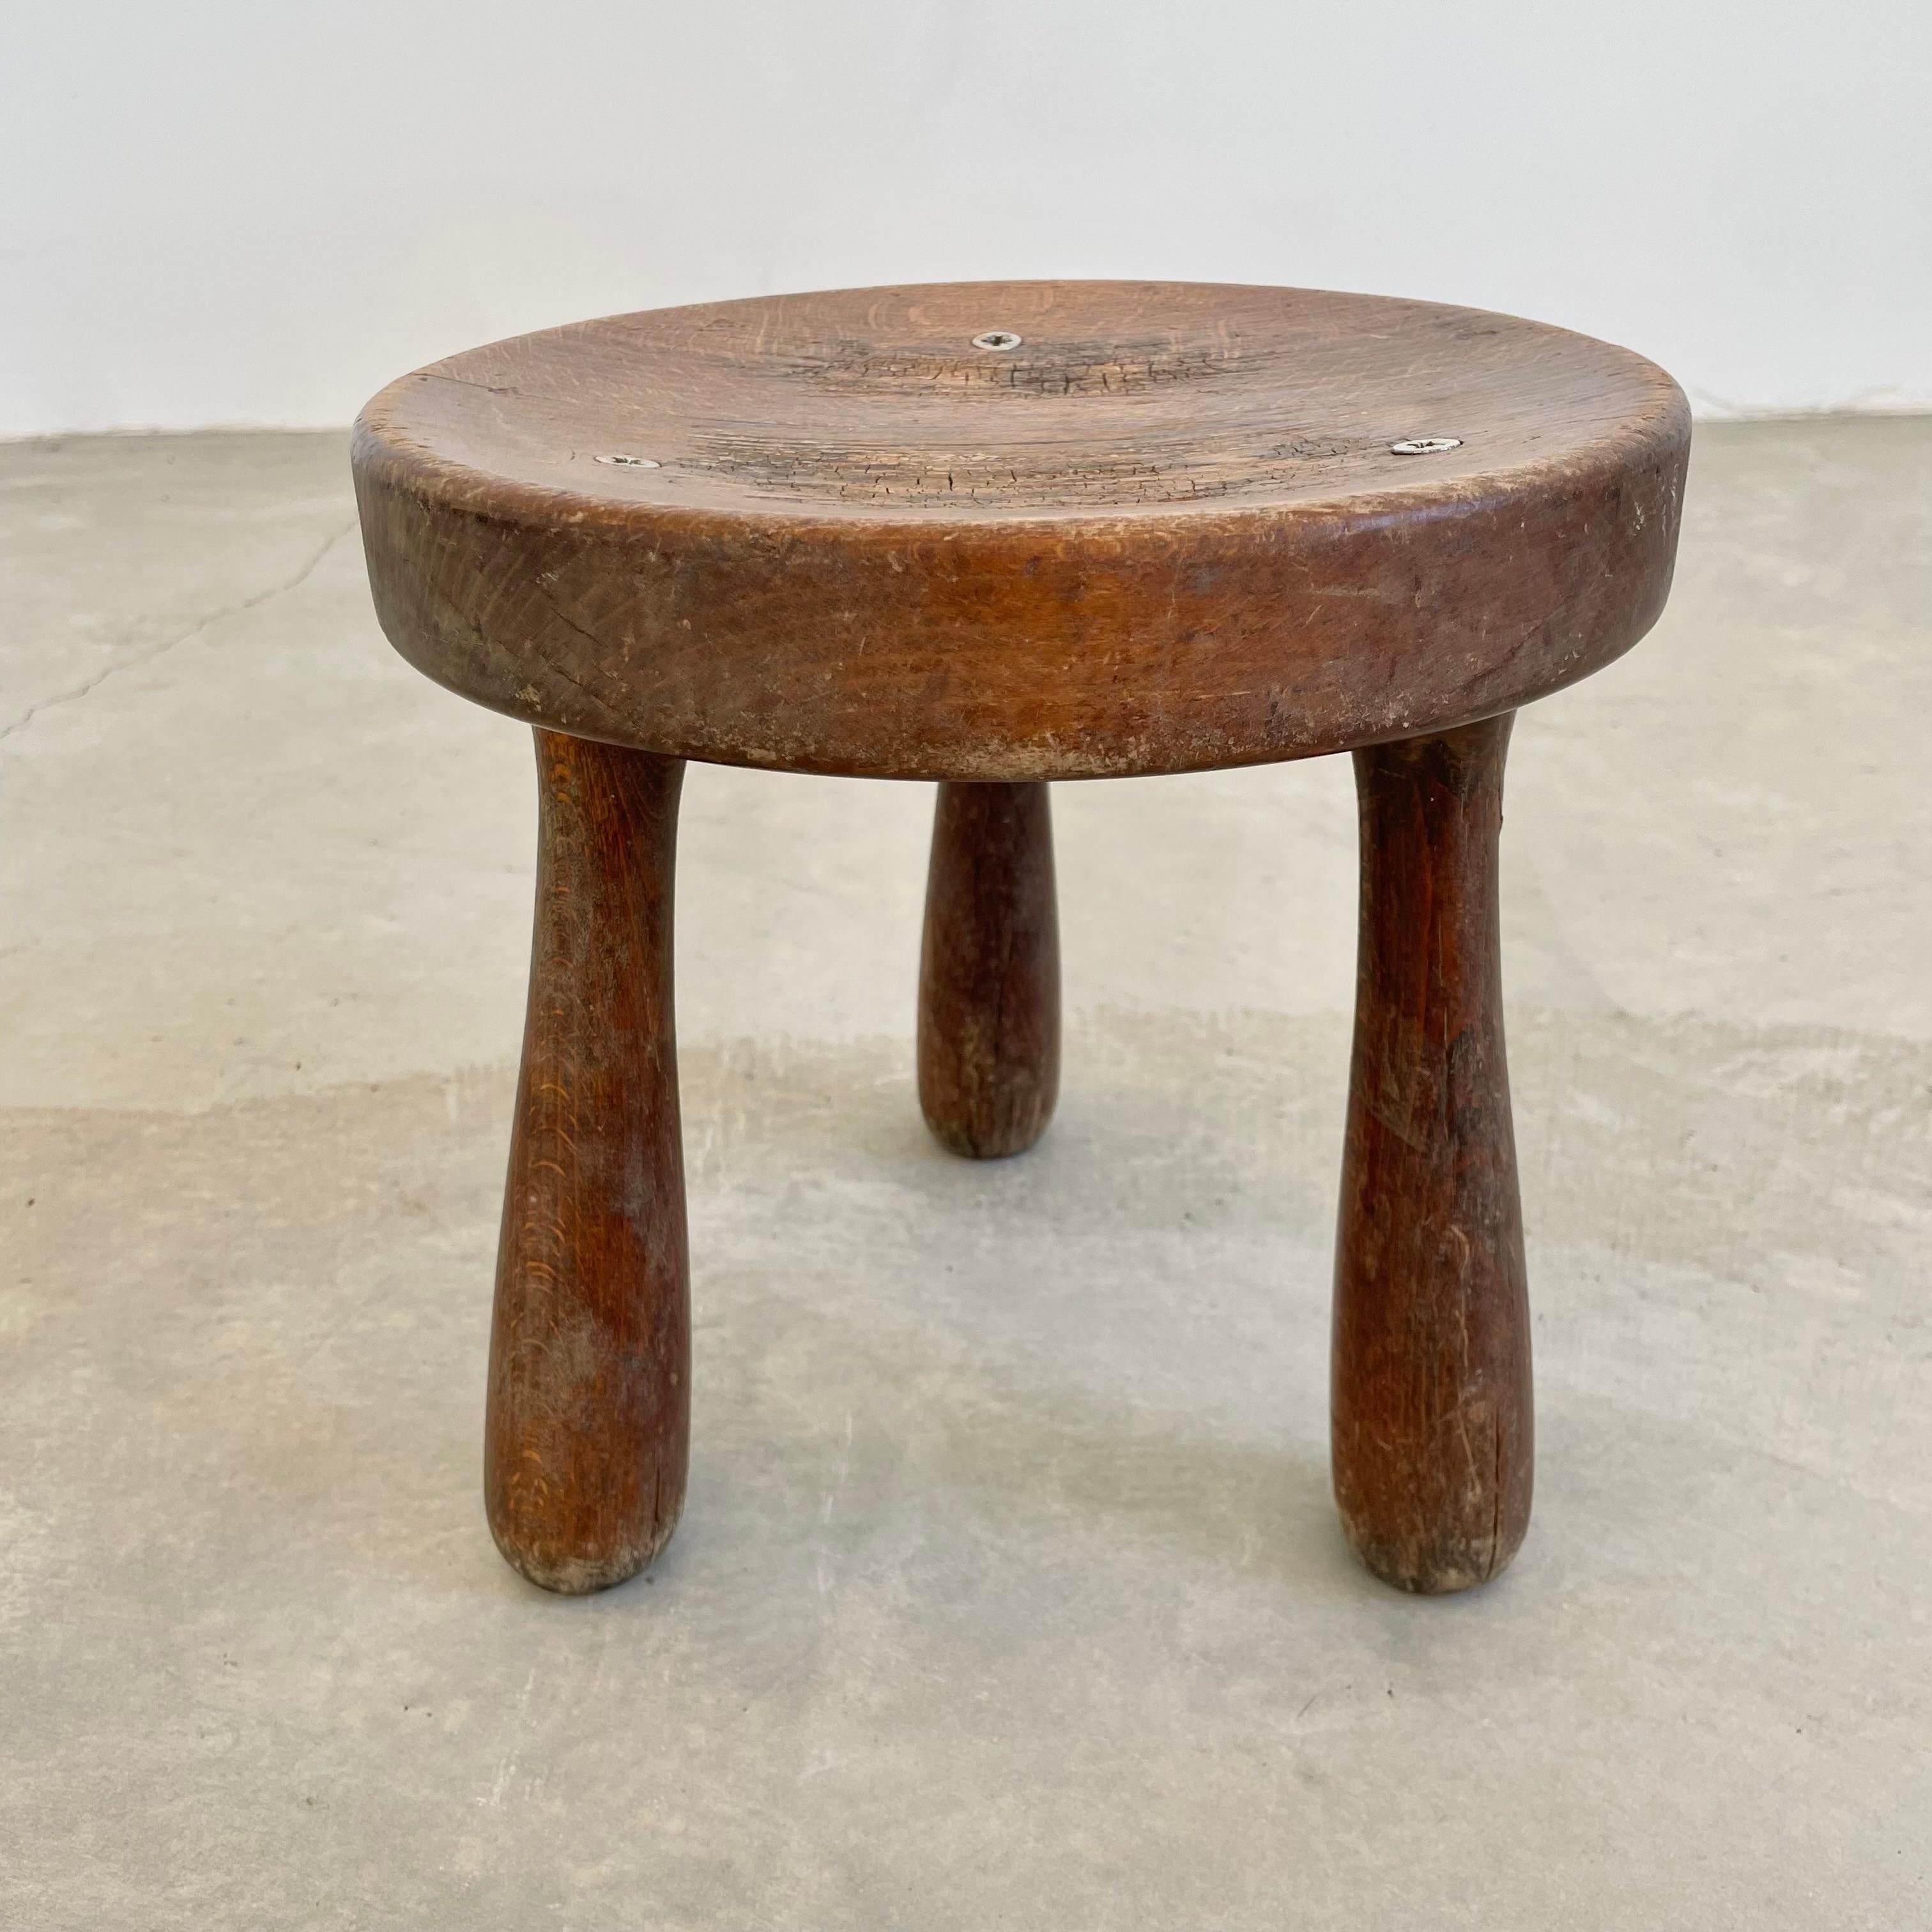 Beautiful wooden tripod stool made in France, circa 1950s. Substantial and chunky seat with sturdy club legs that taper out at the bottom. This stool has a thick round seat with 3 nickel screws. Great patina and grain to the wood. Functional stool.